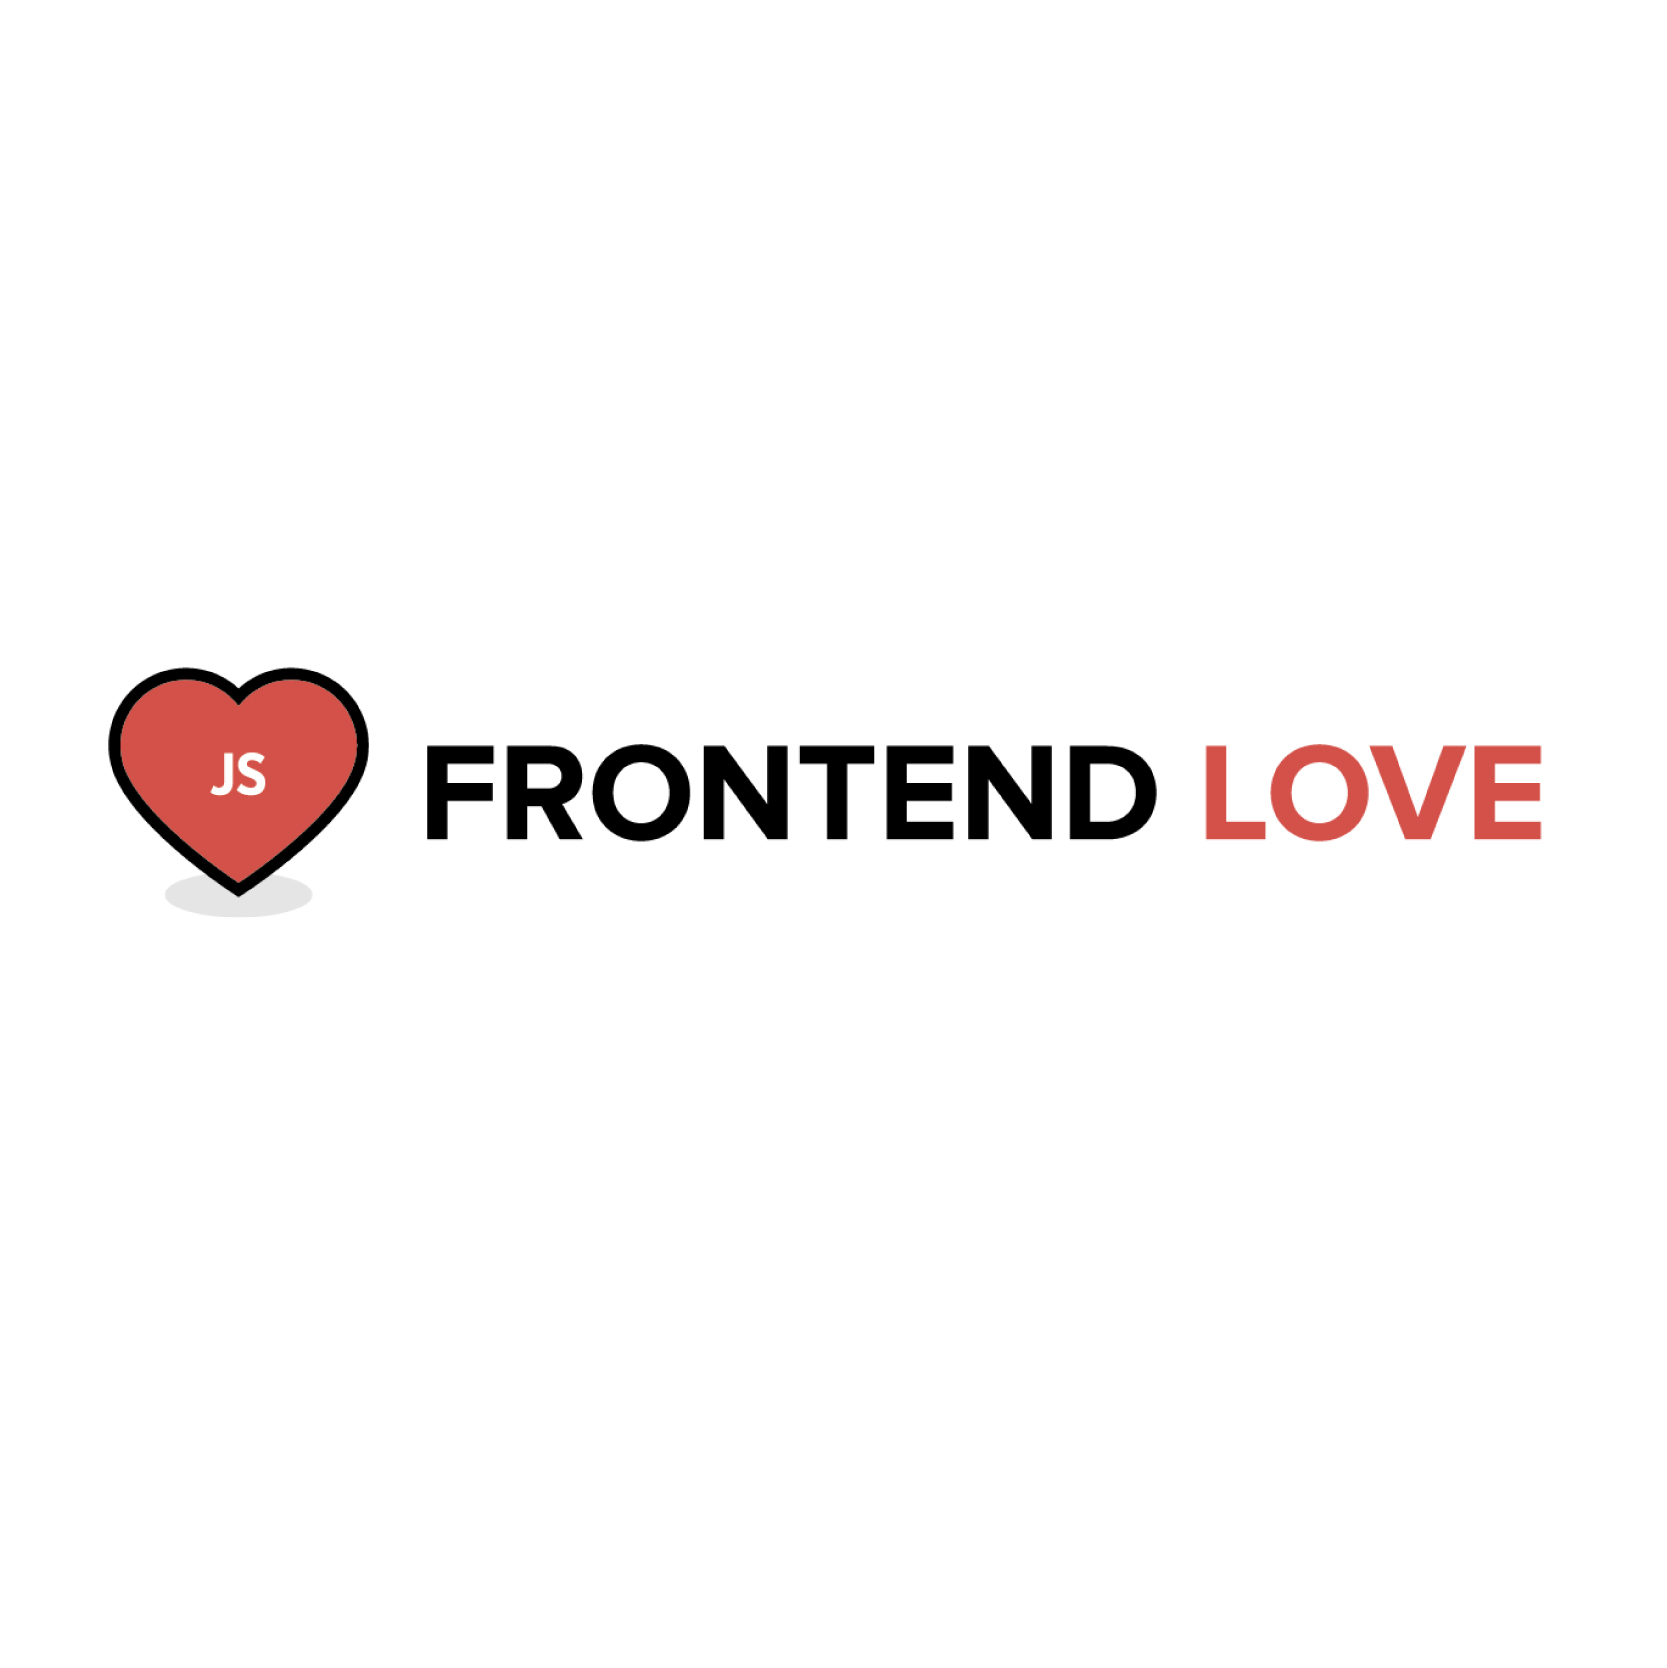 Frontend love 